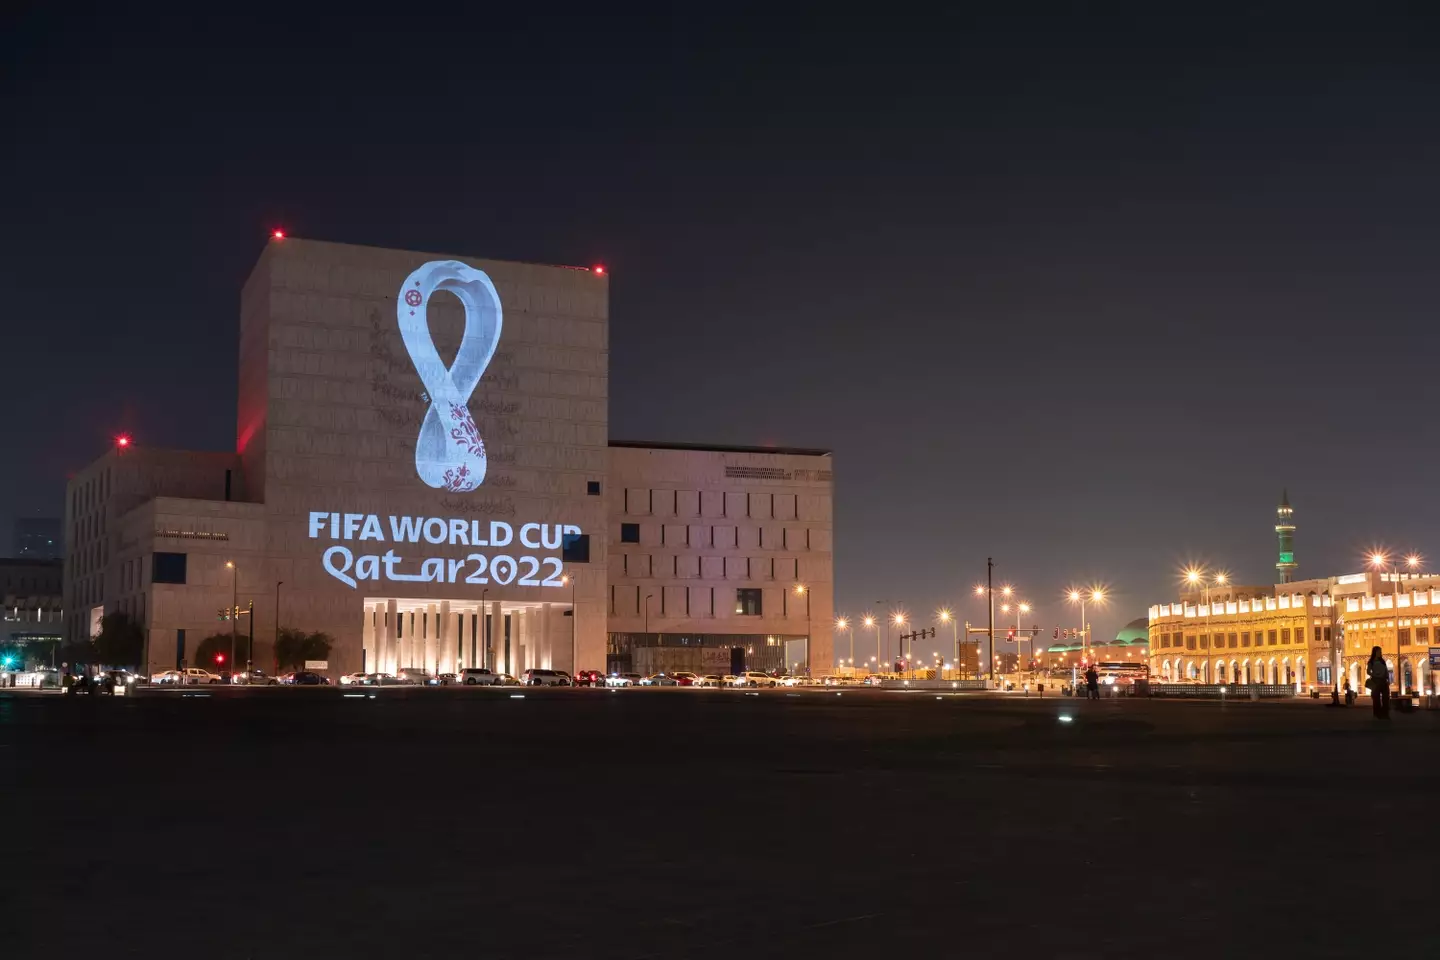 The 2022 Qatar World Cup will be played in the winter.